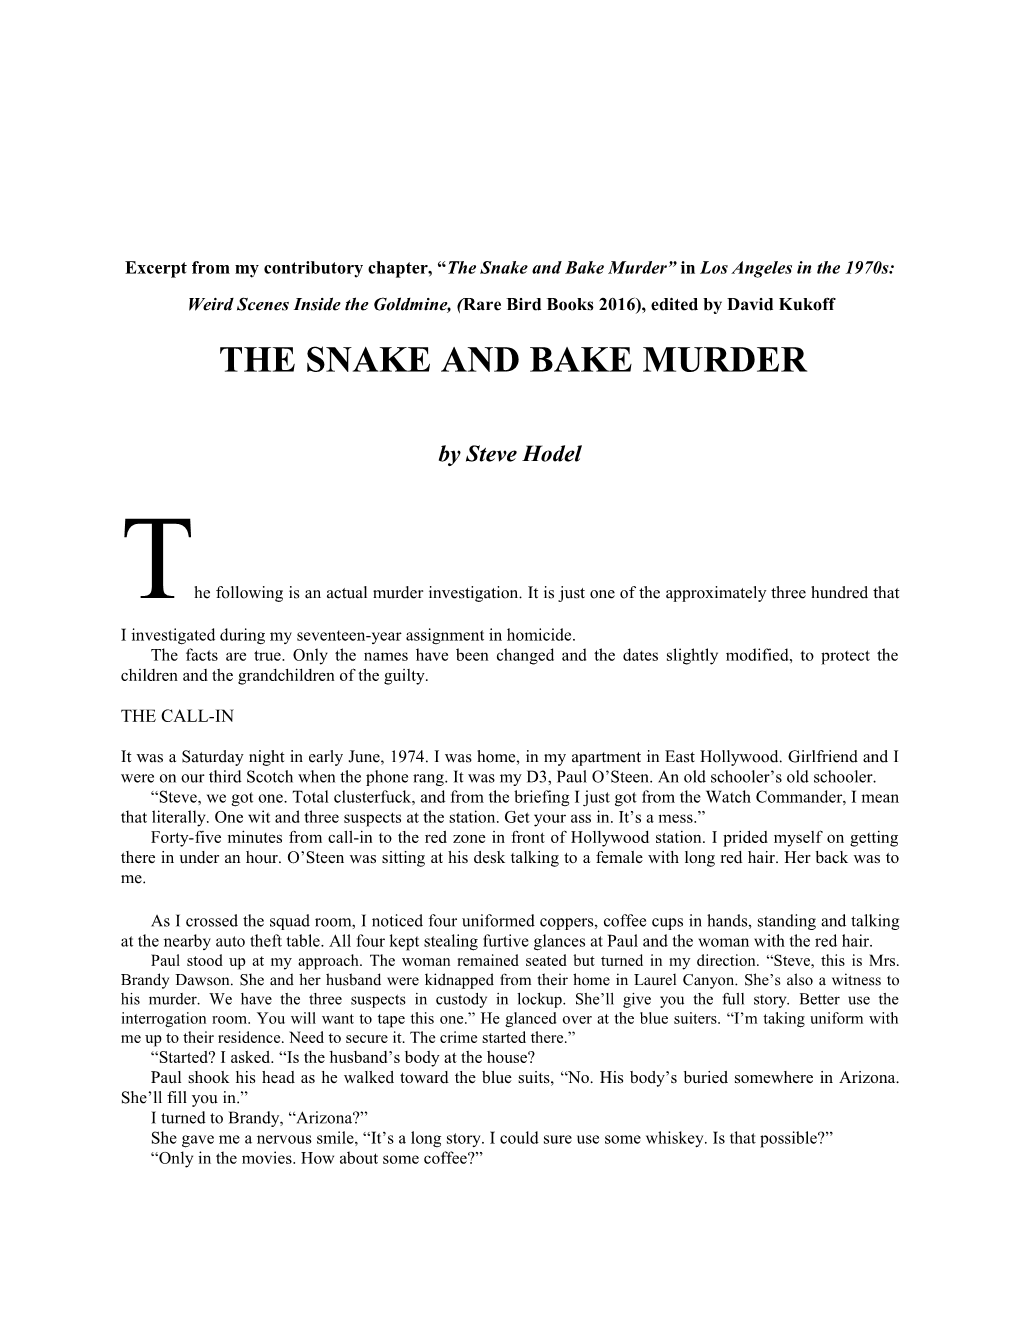 Excerpt from My Contributory Chapter, the Snake and Bake Murder in Los Angeles in The